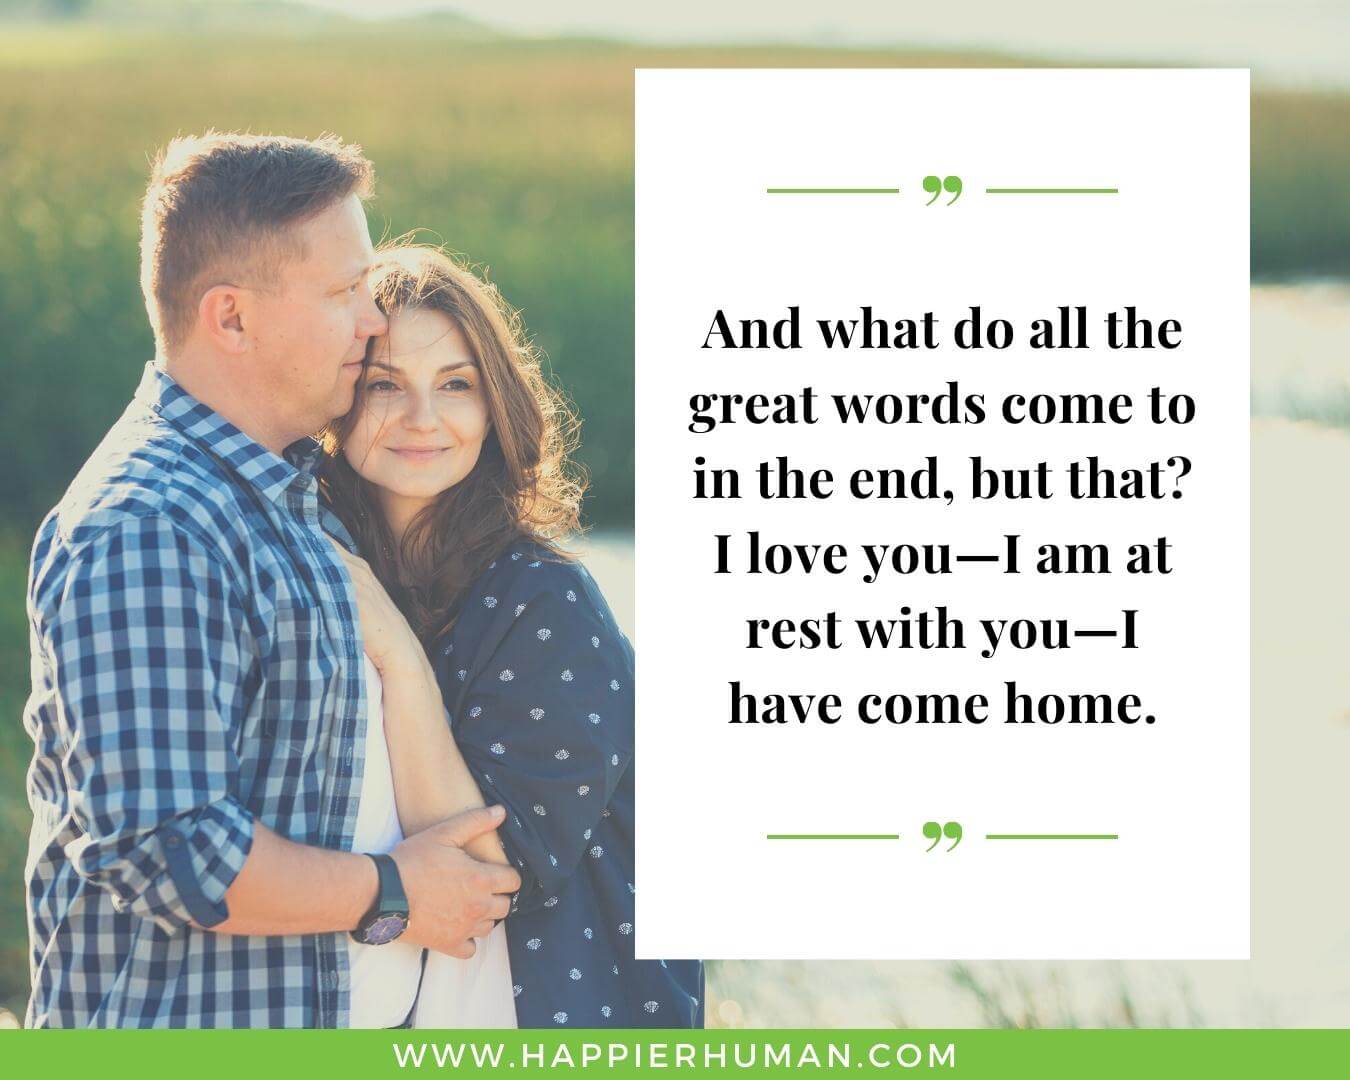 Unconditional Love Quotes for Her - “And what do all the great words come to in the end, but that? I love you—I am at rest with you—I have come home.”